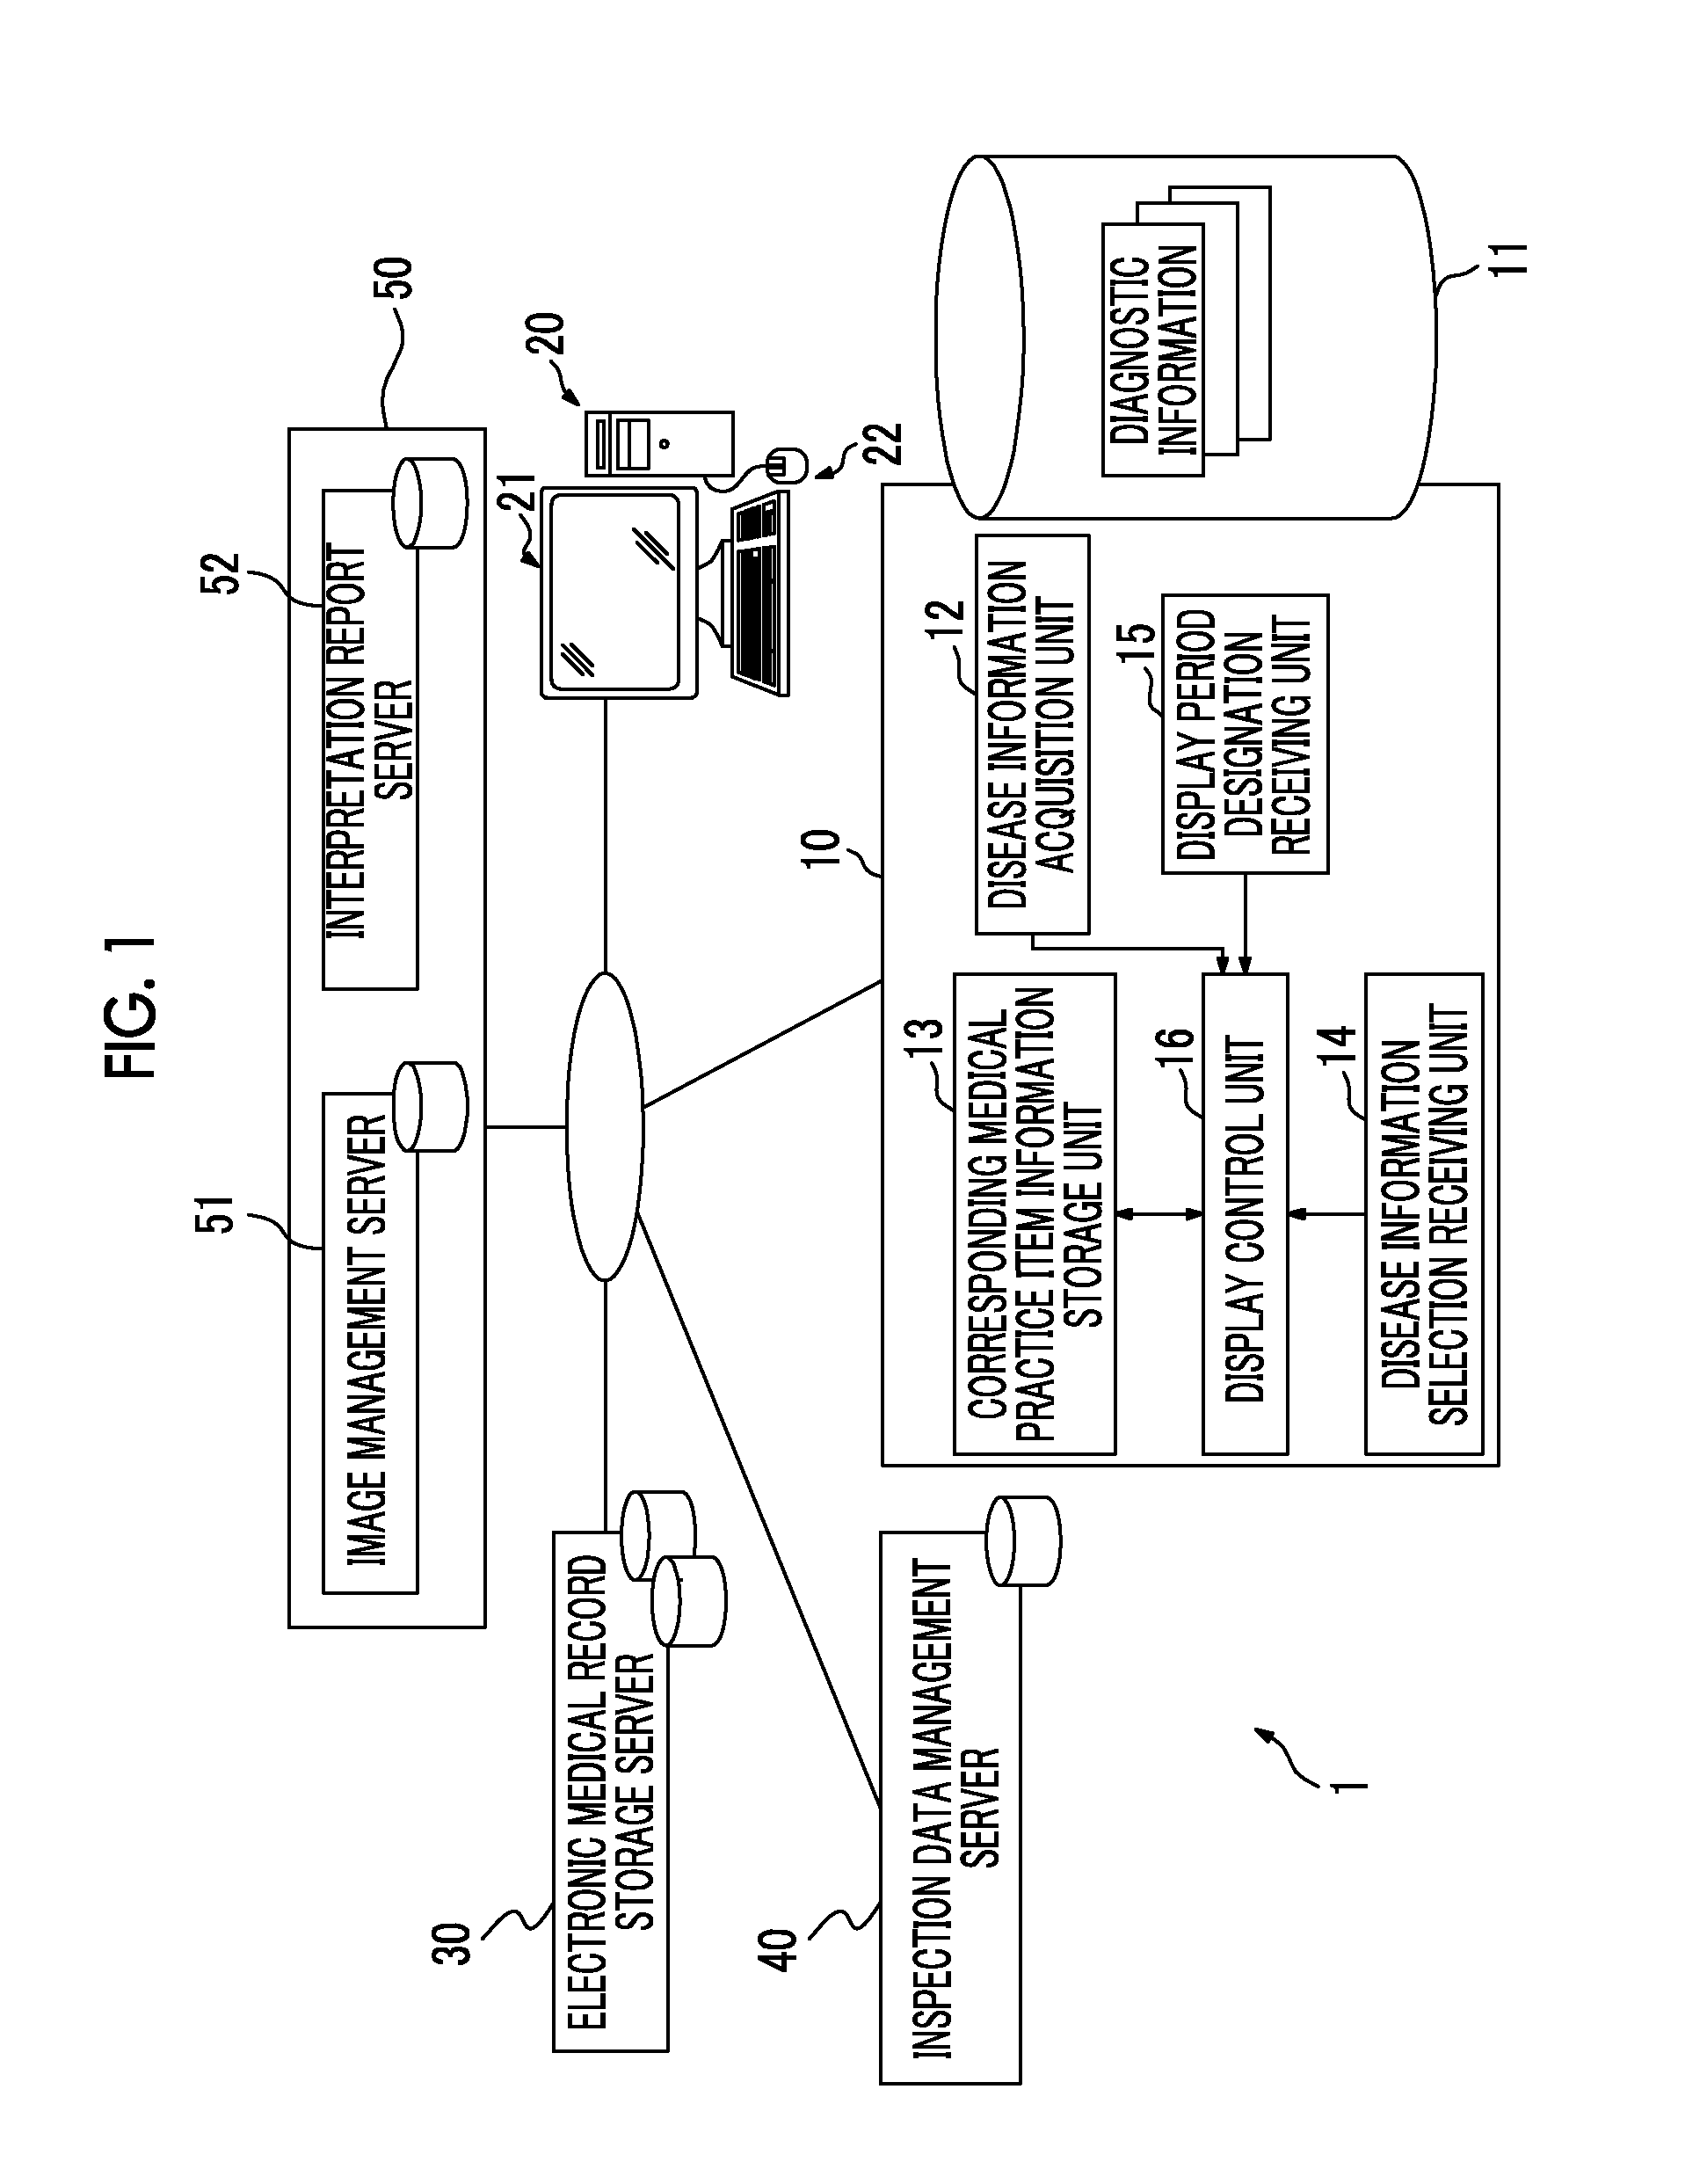 Diagnostic information display control device, method, and program